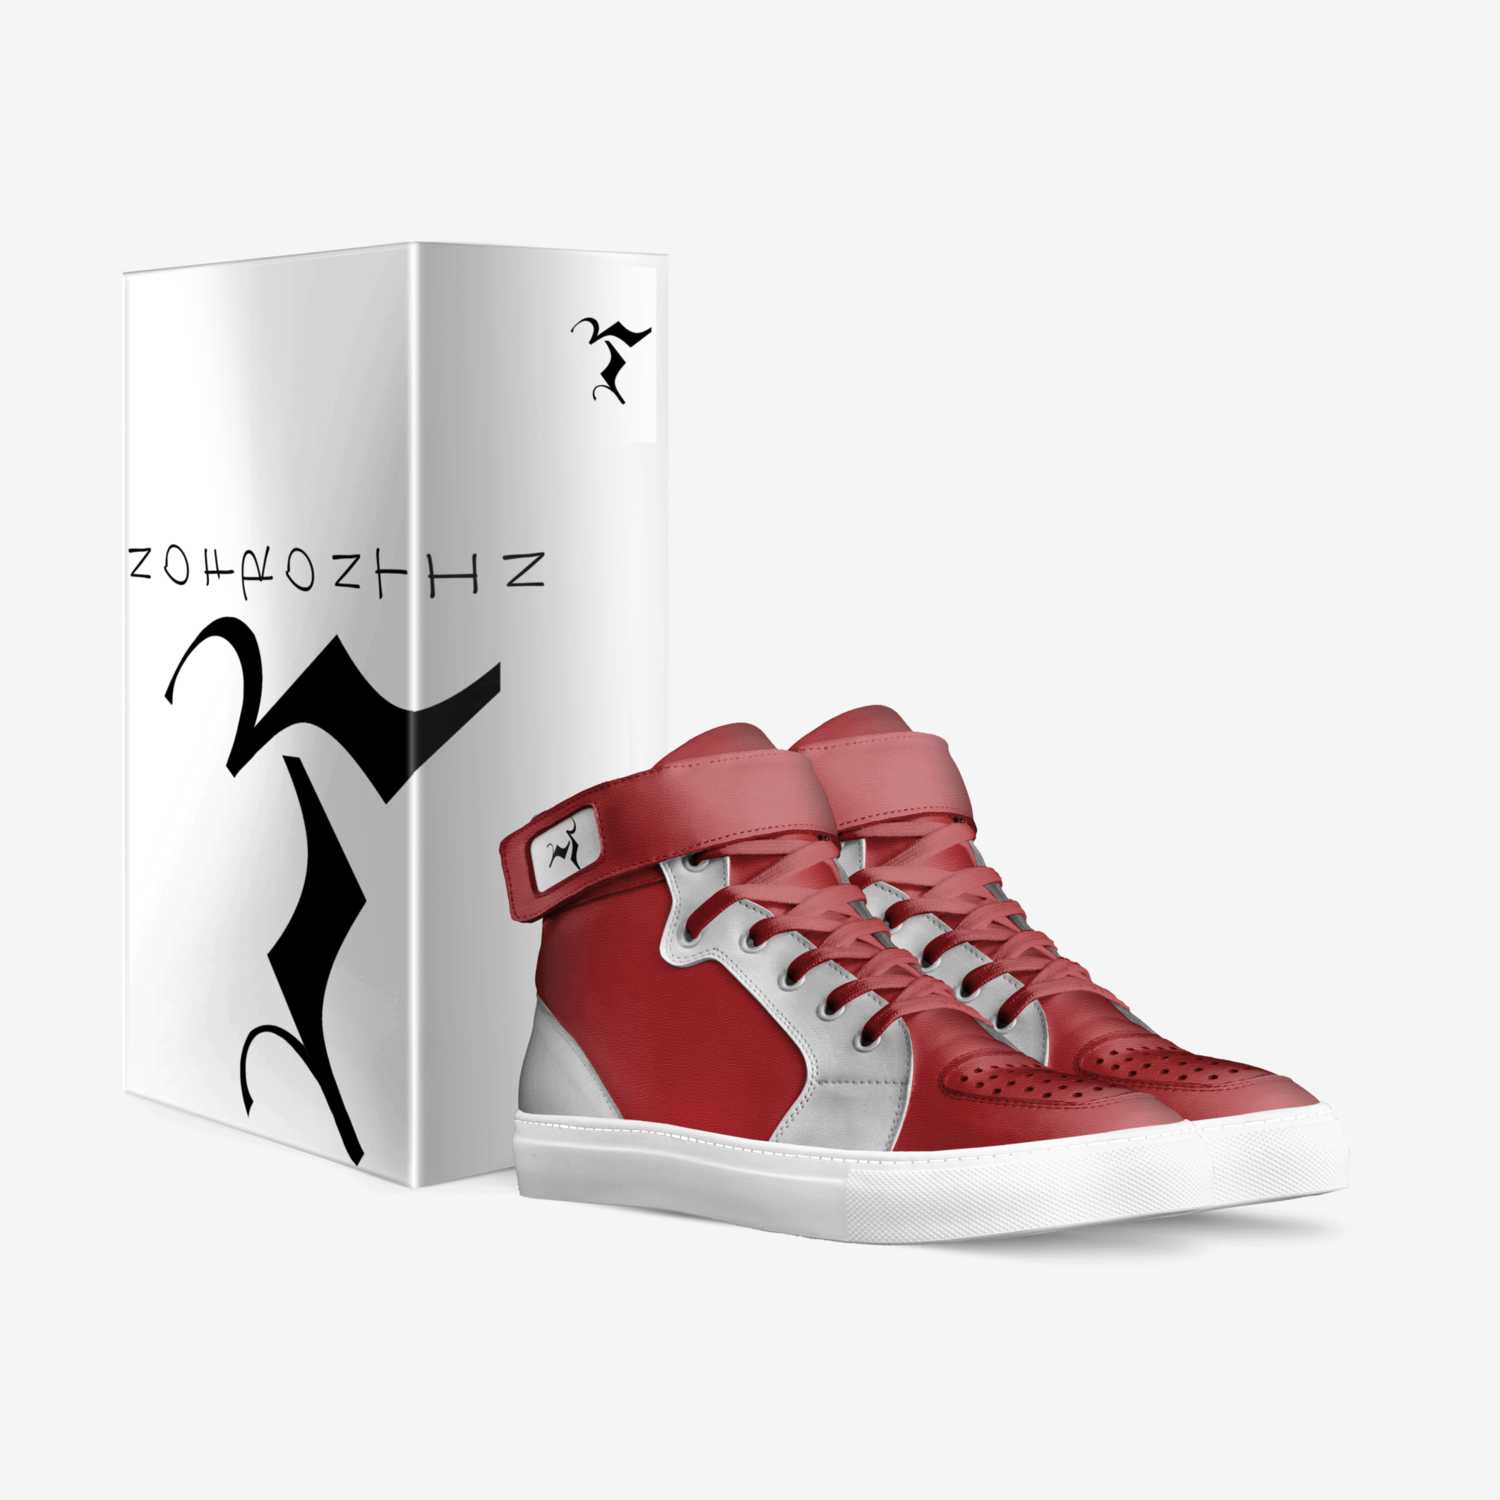 NOFRONTIN custom made in Italy shoes by Carlos Gonzalez | Box view